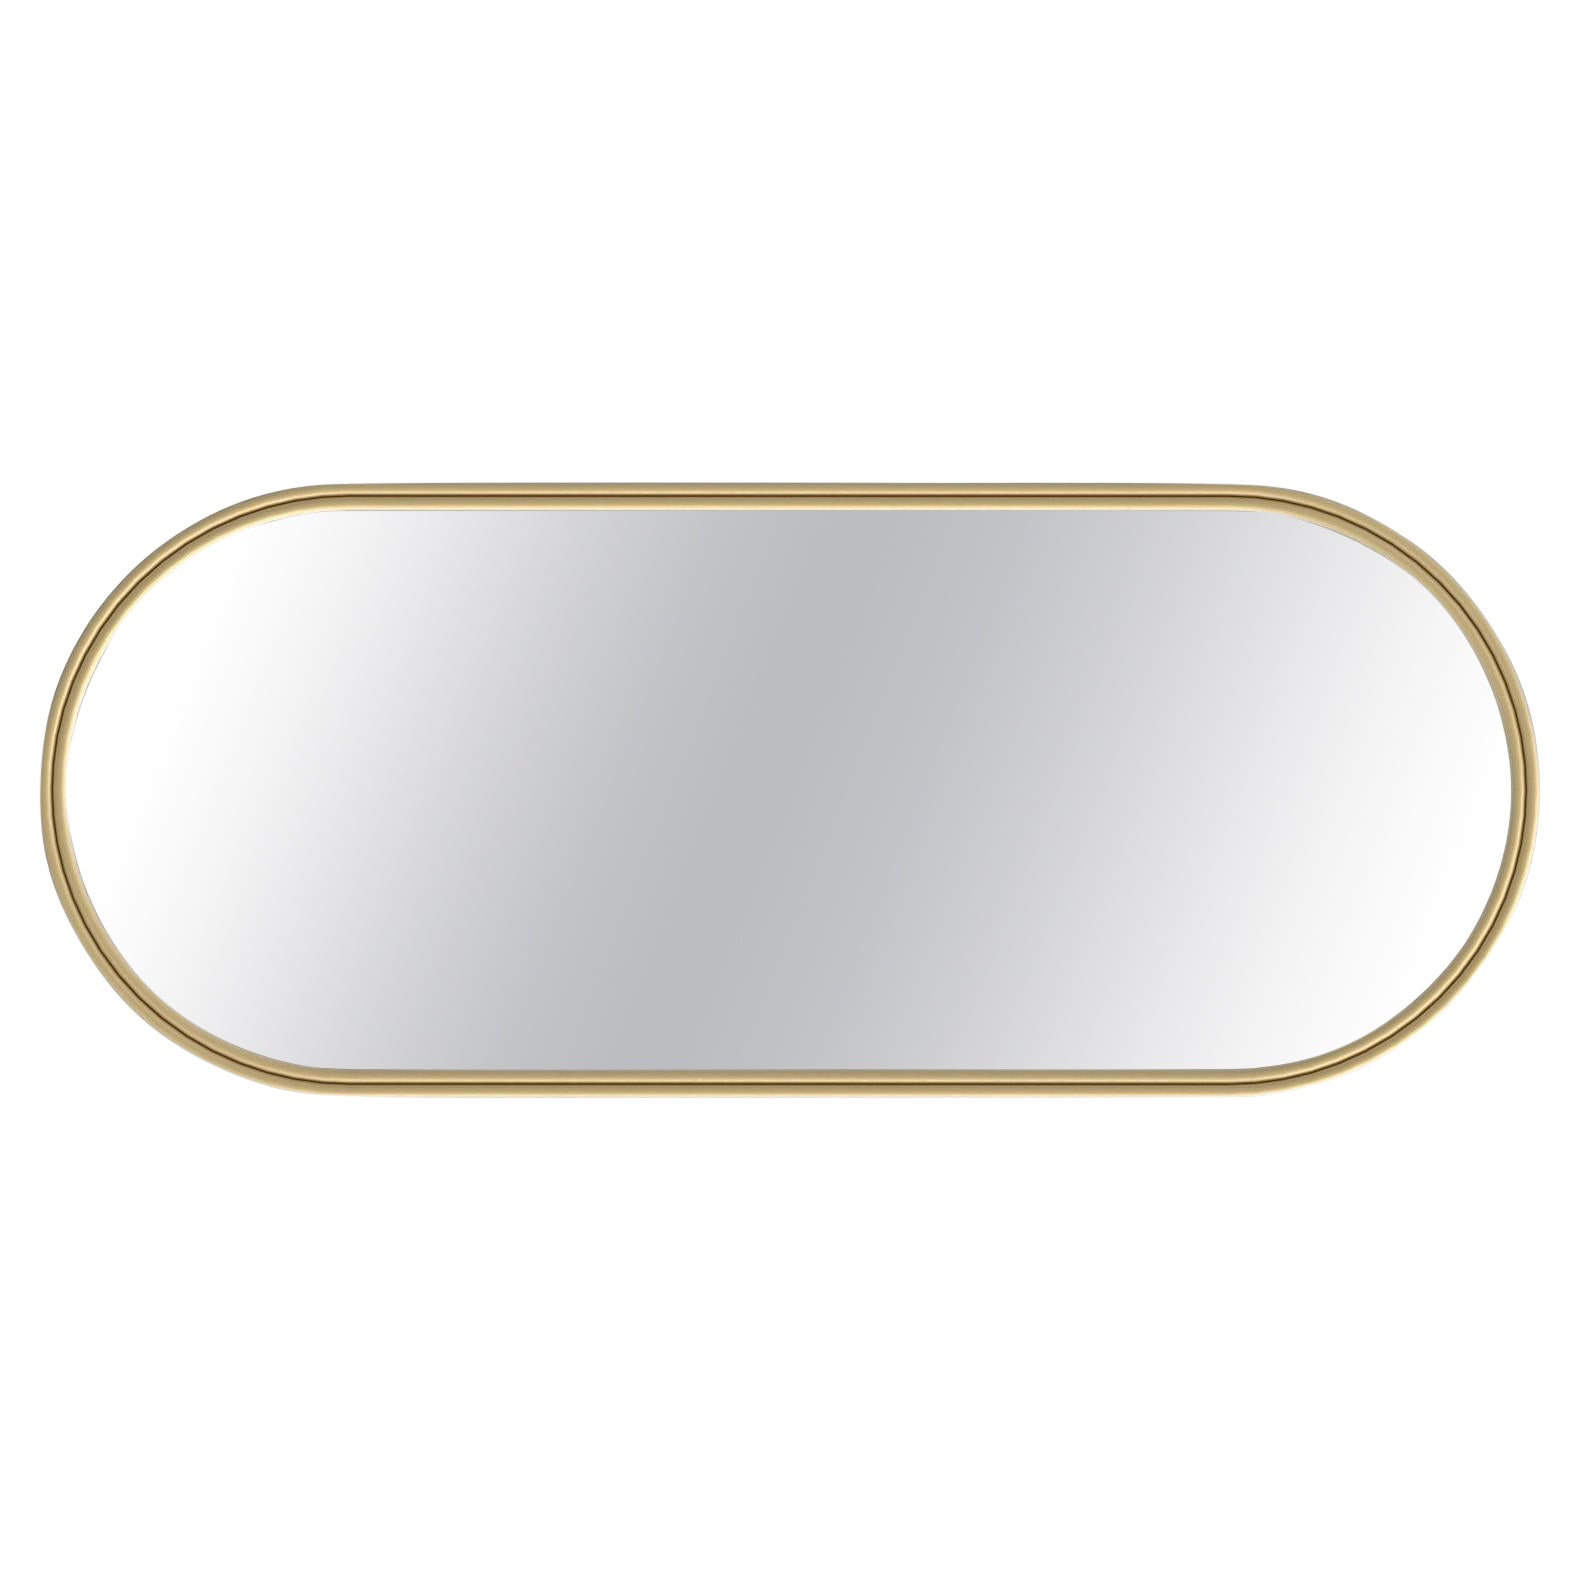 Modern MIO Wall Mirror, Brushed Brass, Handmade in Portugal by Greenapple